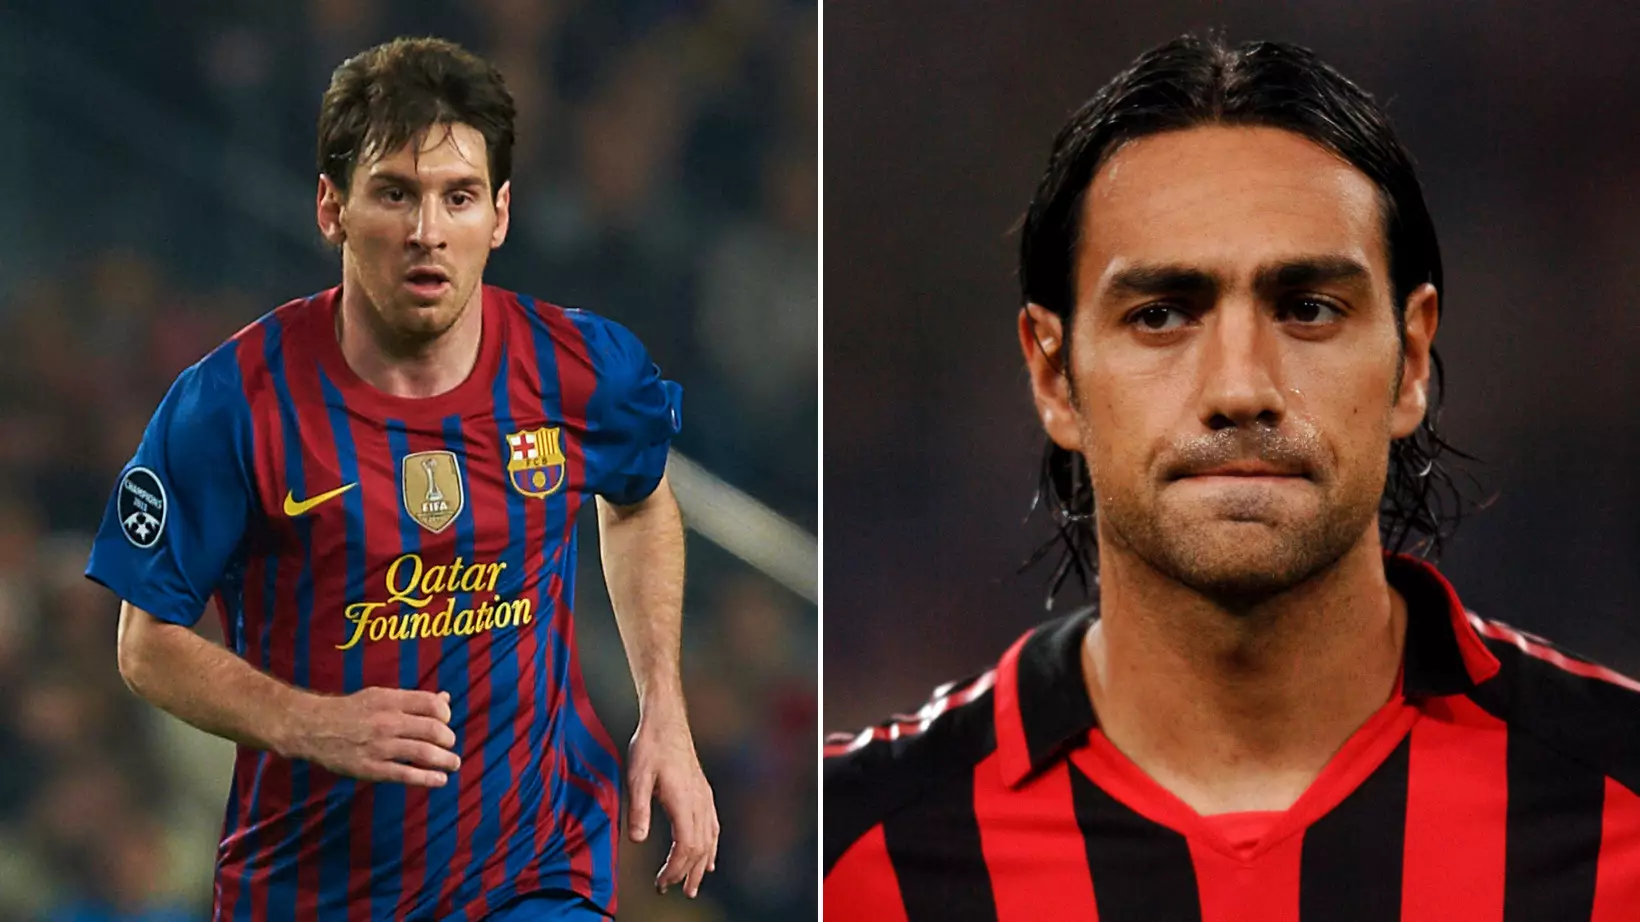 Alessandro Nesta Explains How Lionel Messi 'Mentally Destroyed' Him During Champions League Match